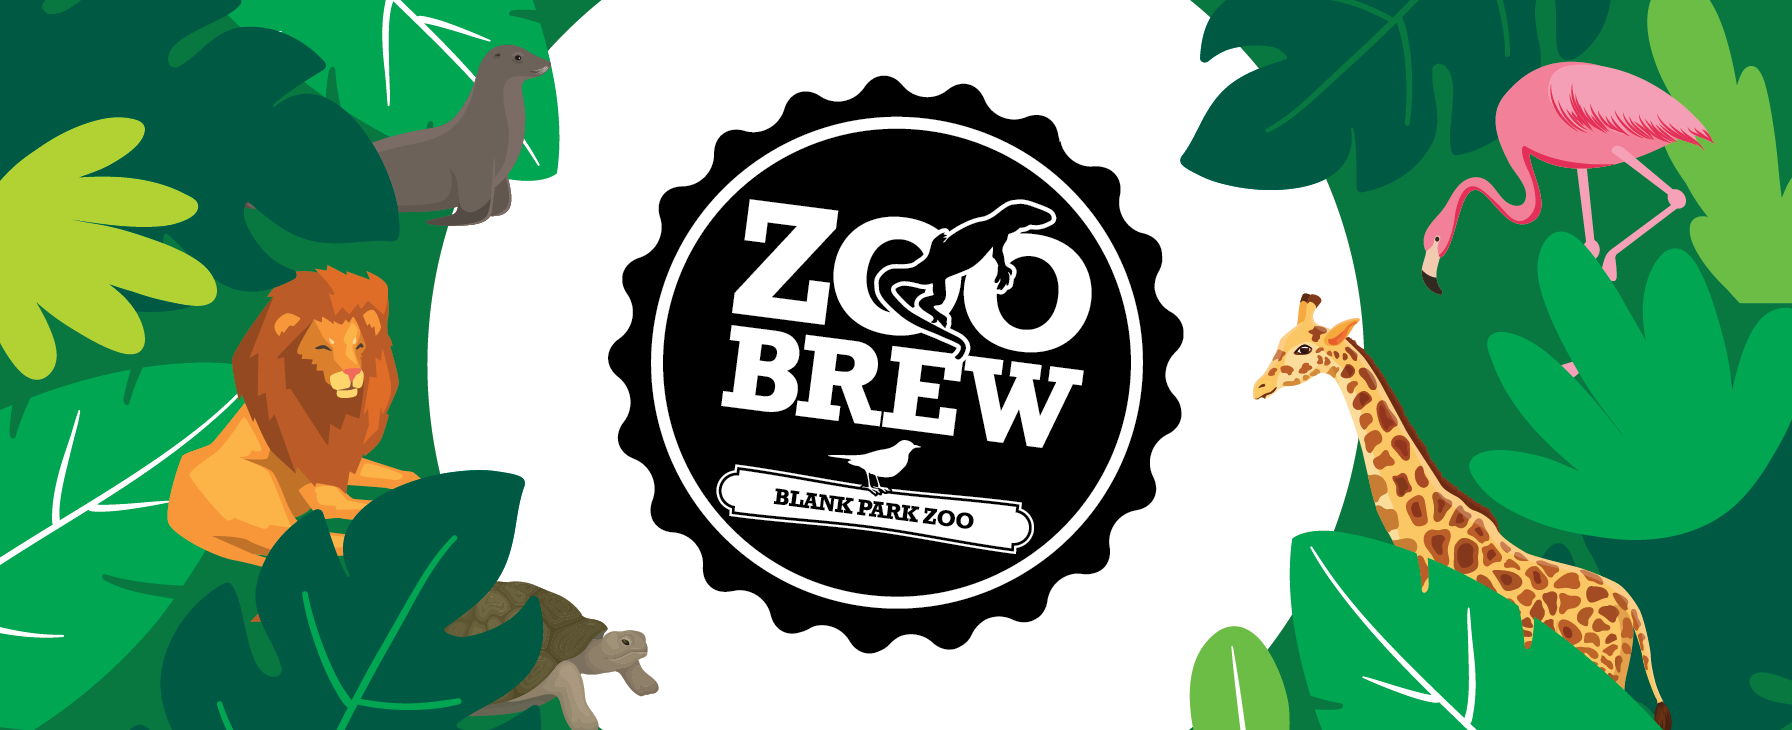 Zoo Brew at the Blank Park Zoo